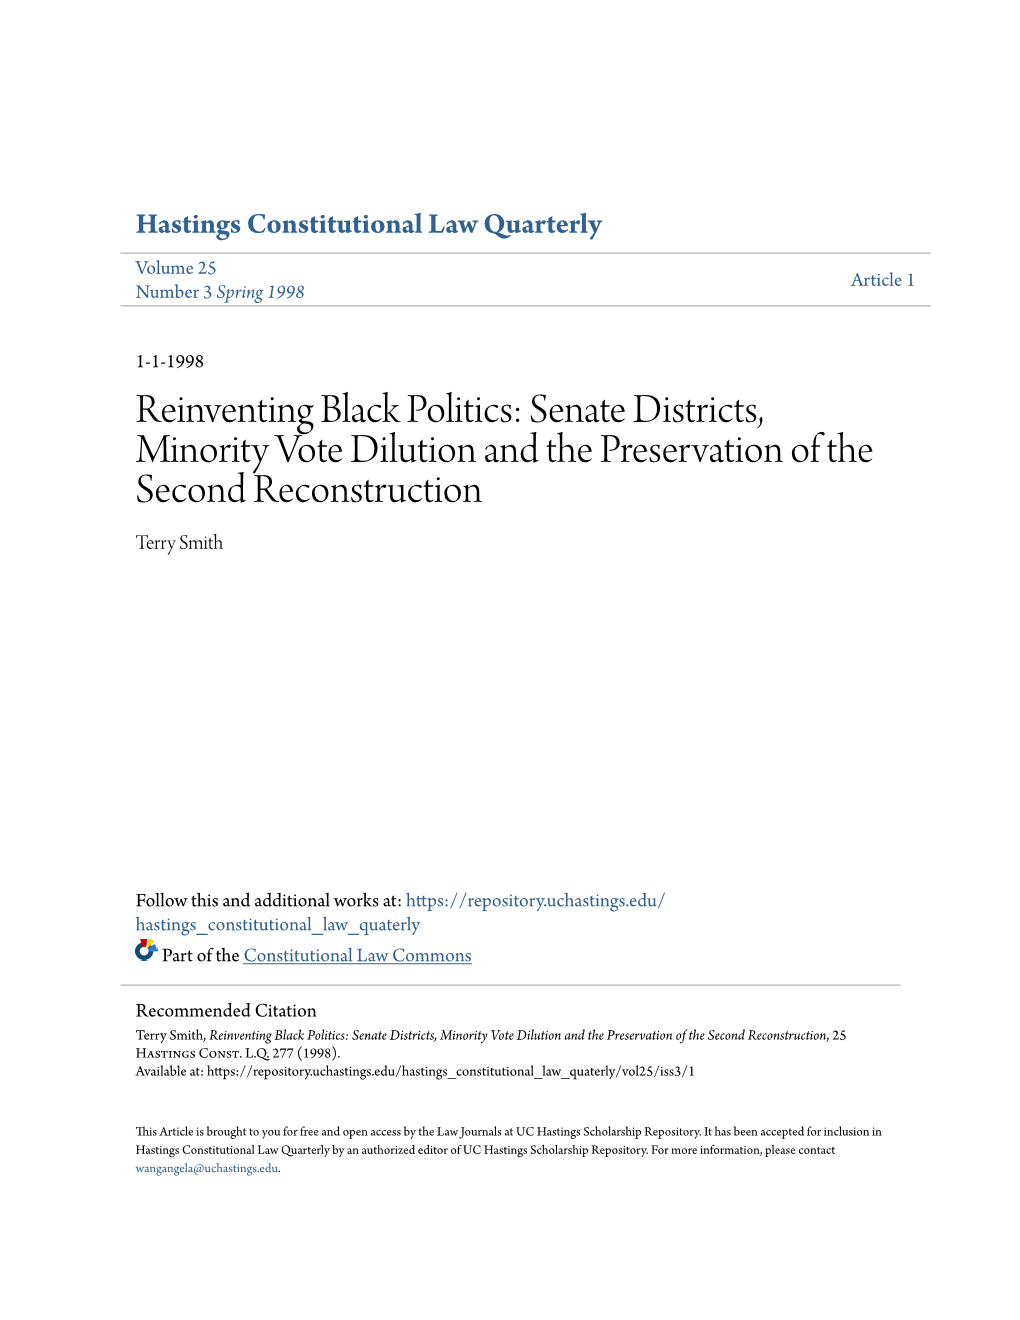 Reinventing Black Politics: Senate Districts, Minority Vote Dilution and the Preservation of the Second Reconstruction Terry Smith